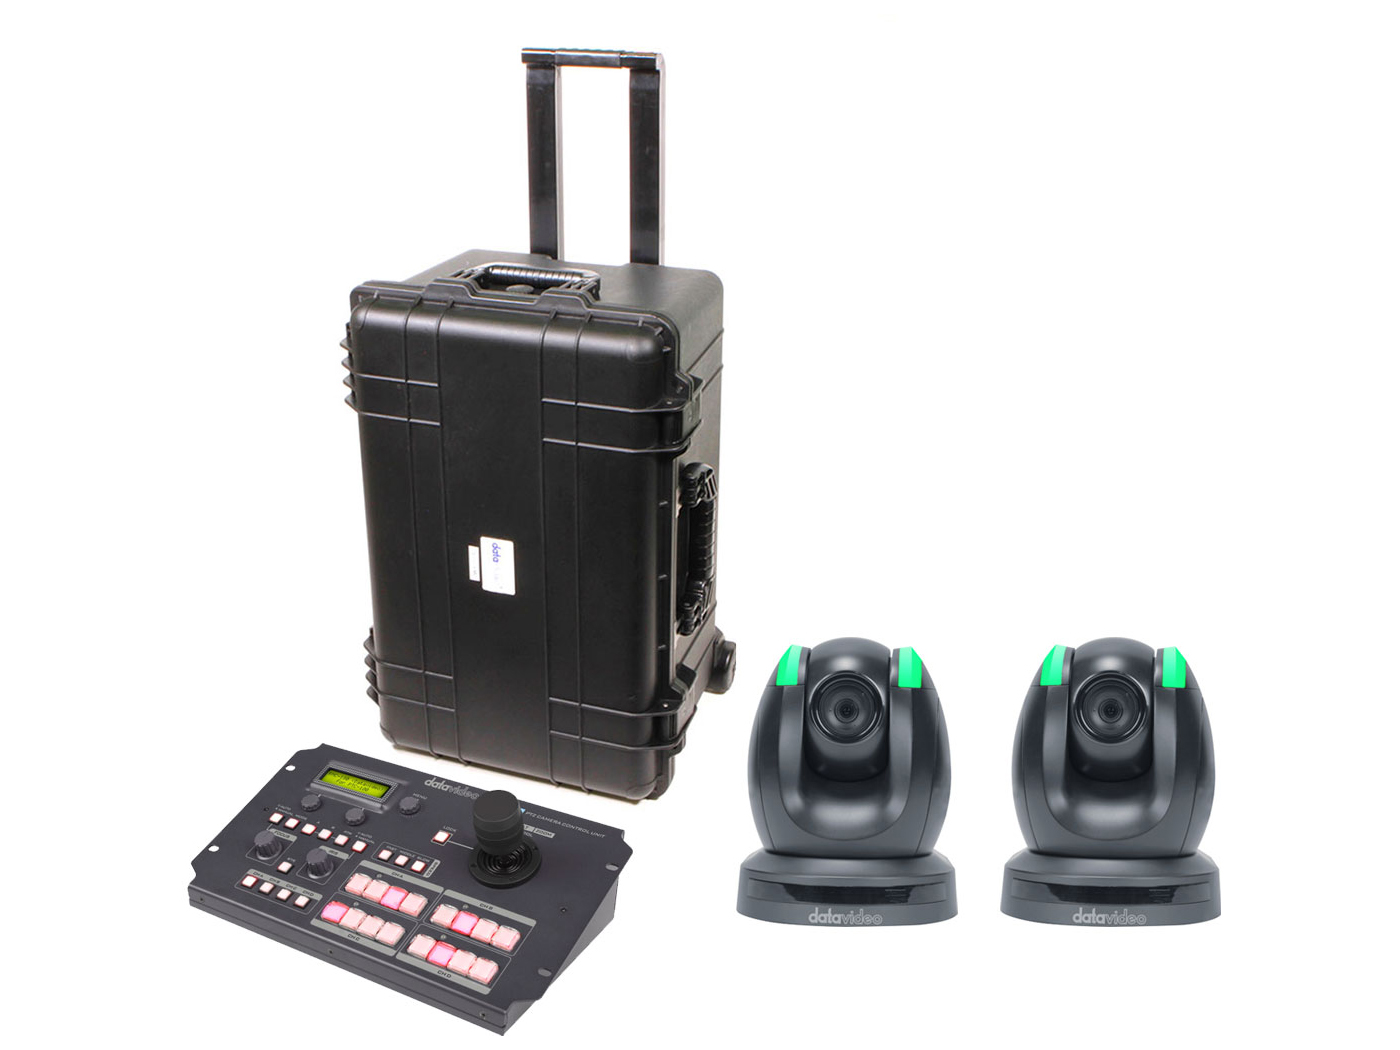 Datavideo GO-2CAM 2 remote camera kit with controller/cables and hand-carry case